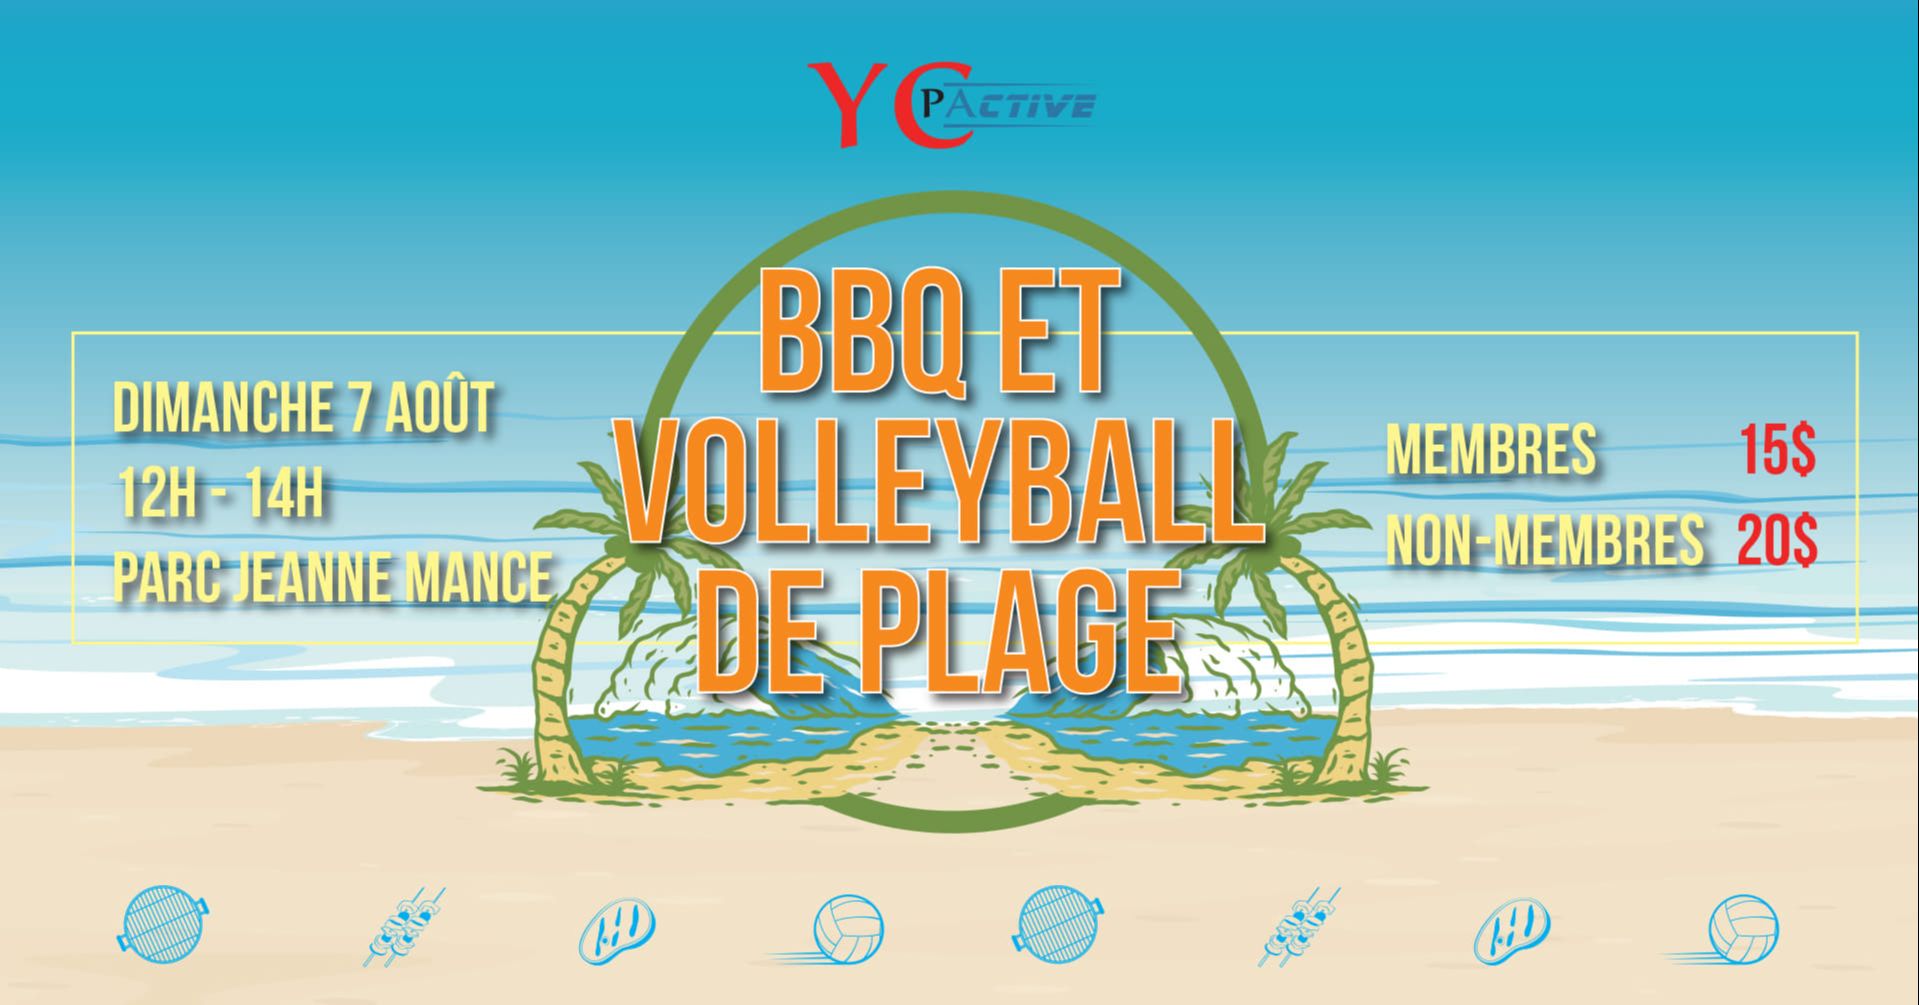 YCPActive BBQ et volleyball de plage